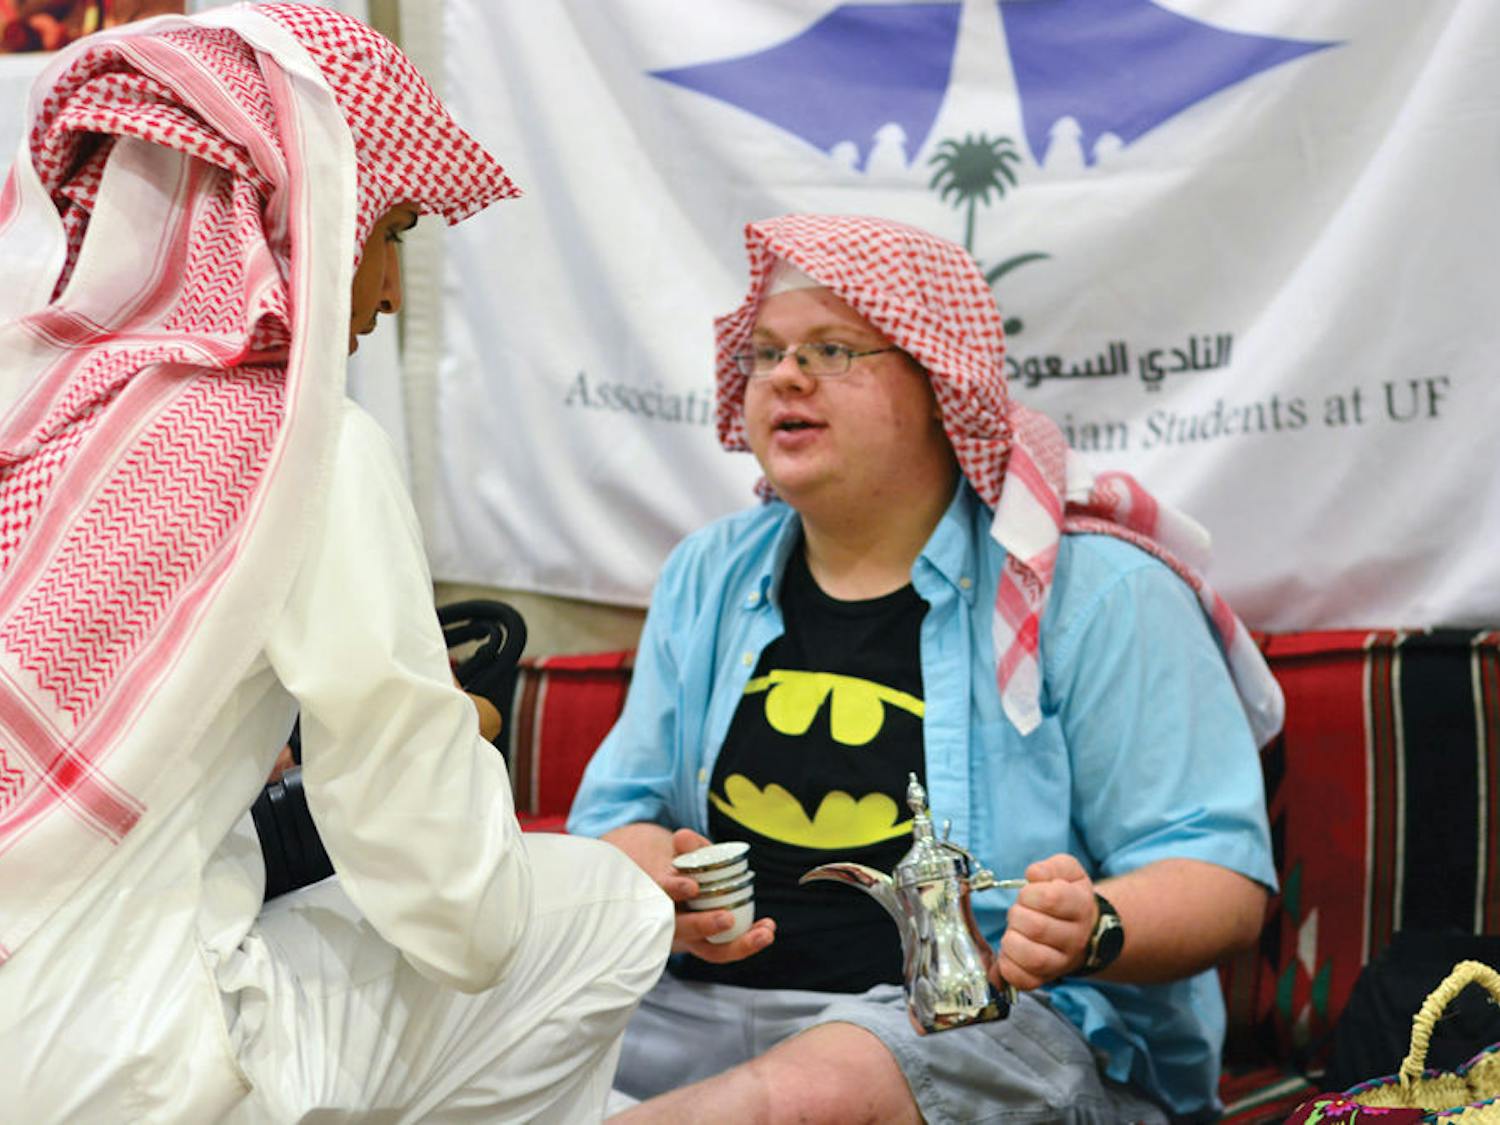 Mohammed Alqarni, 26, shows UF chemical engineering freshman Alex Logsdon, 18, how to hold a tea set during the Saudi Arabian National Day event in the Reitz Union on Tuesday afternoon.